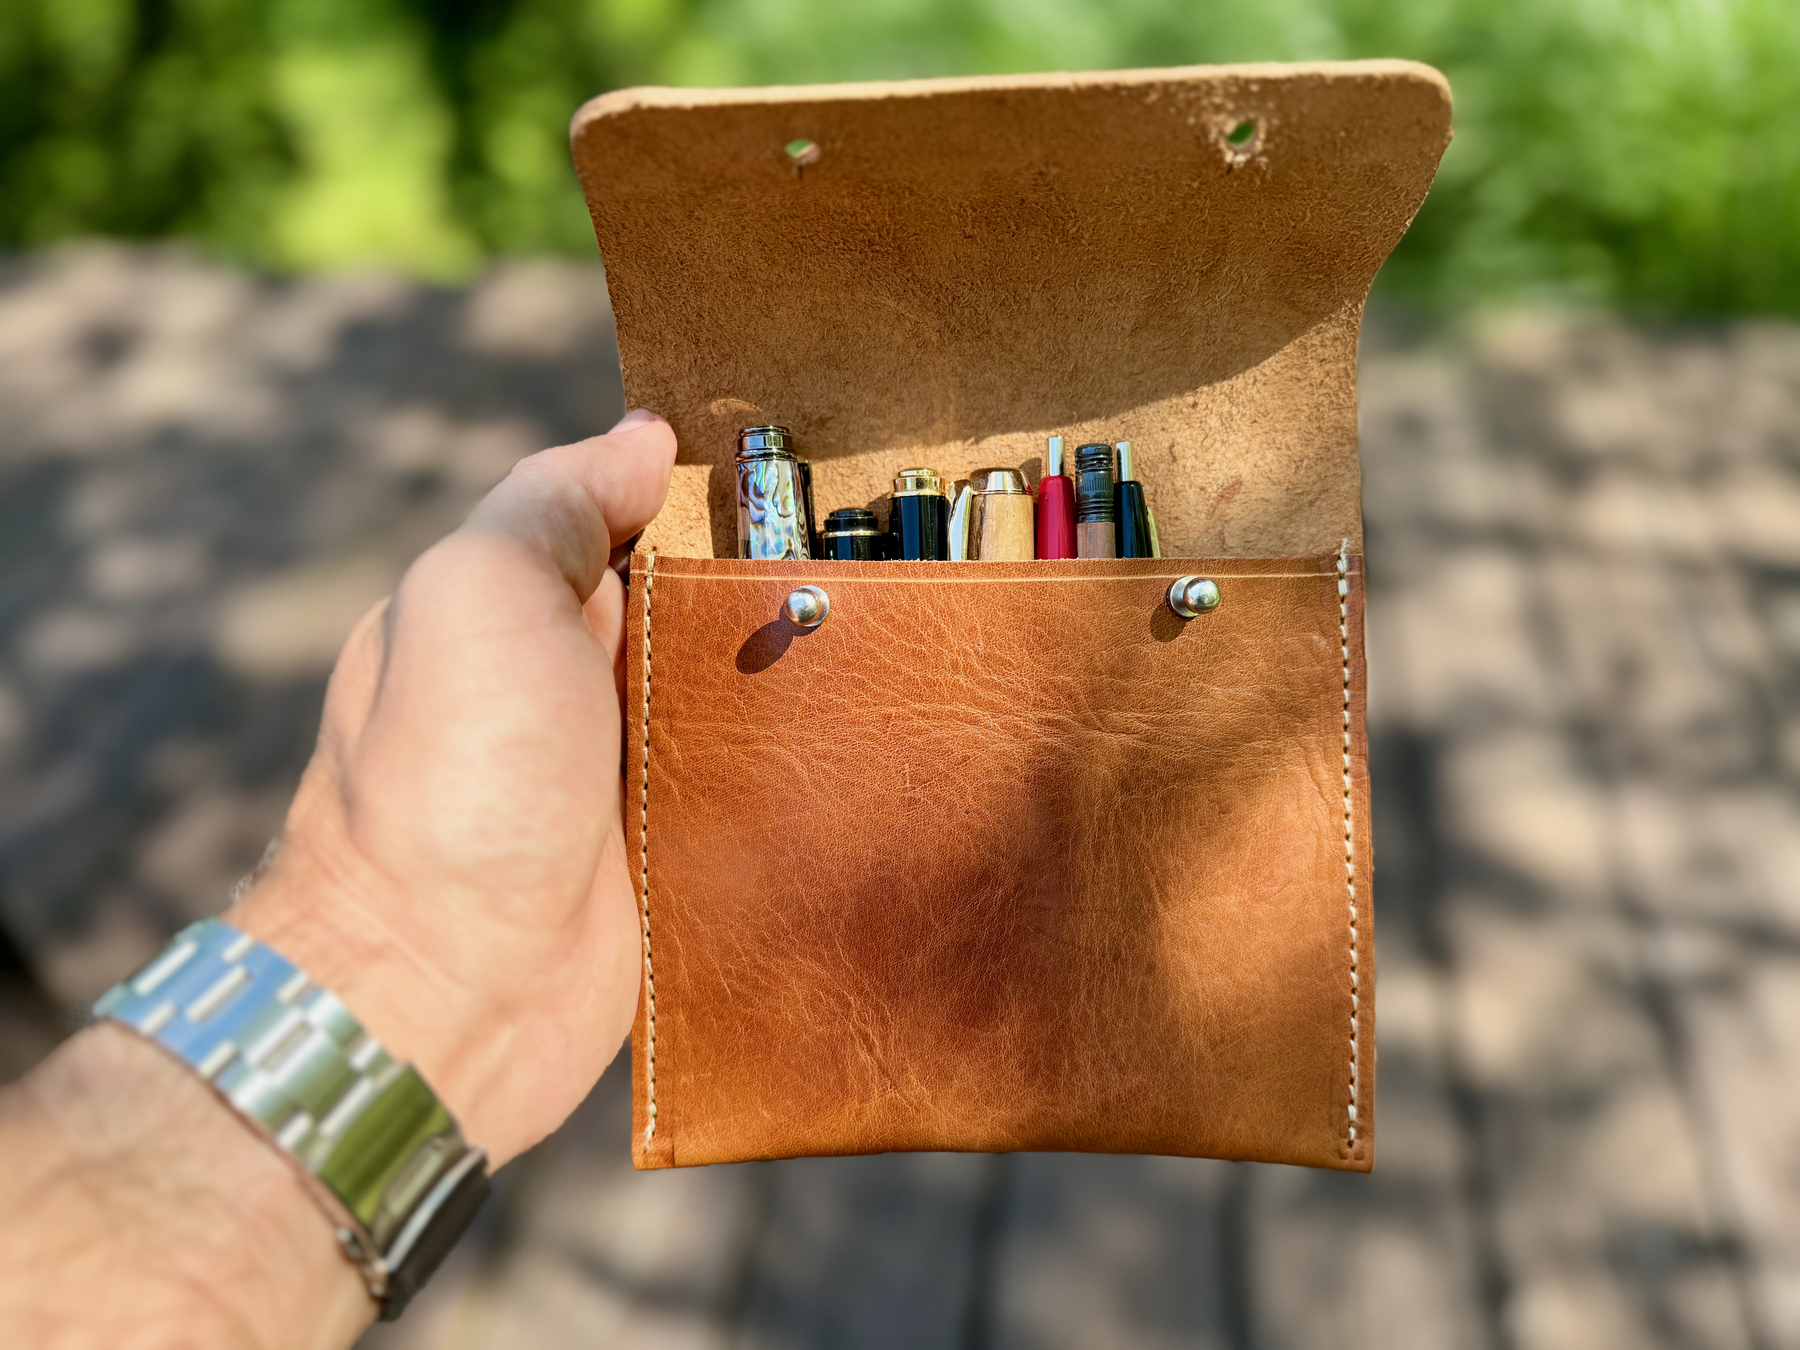 A hand holds an open leather pouch containing multiple pens and a pencil.